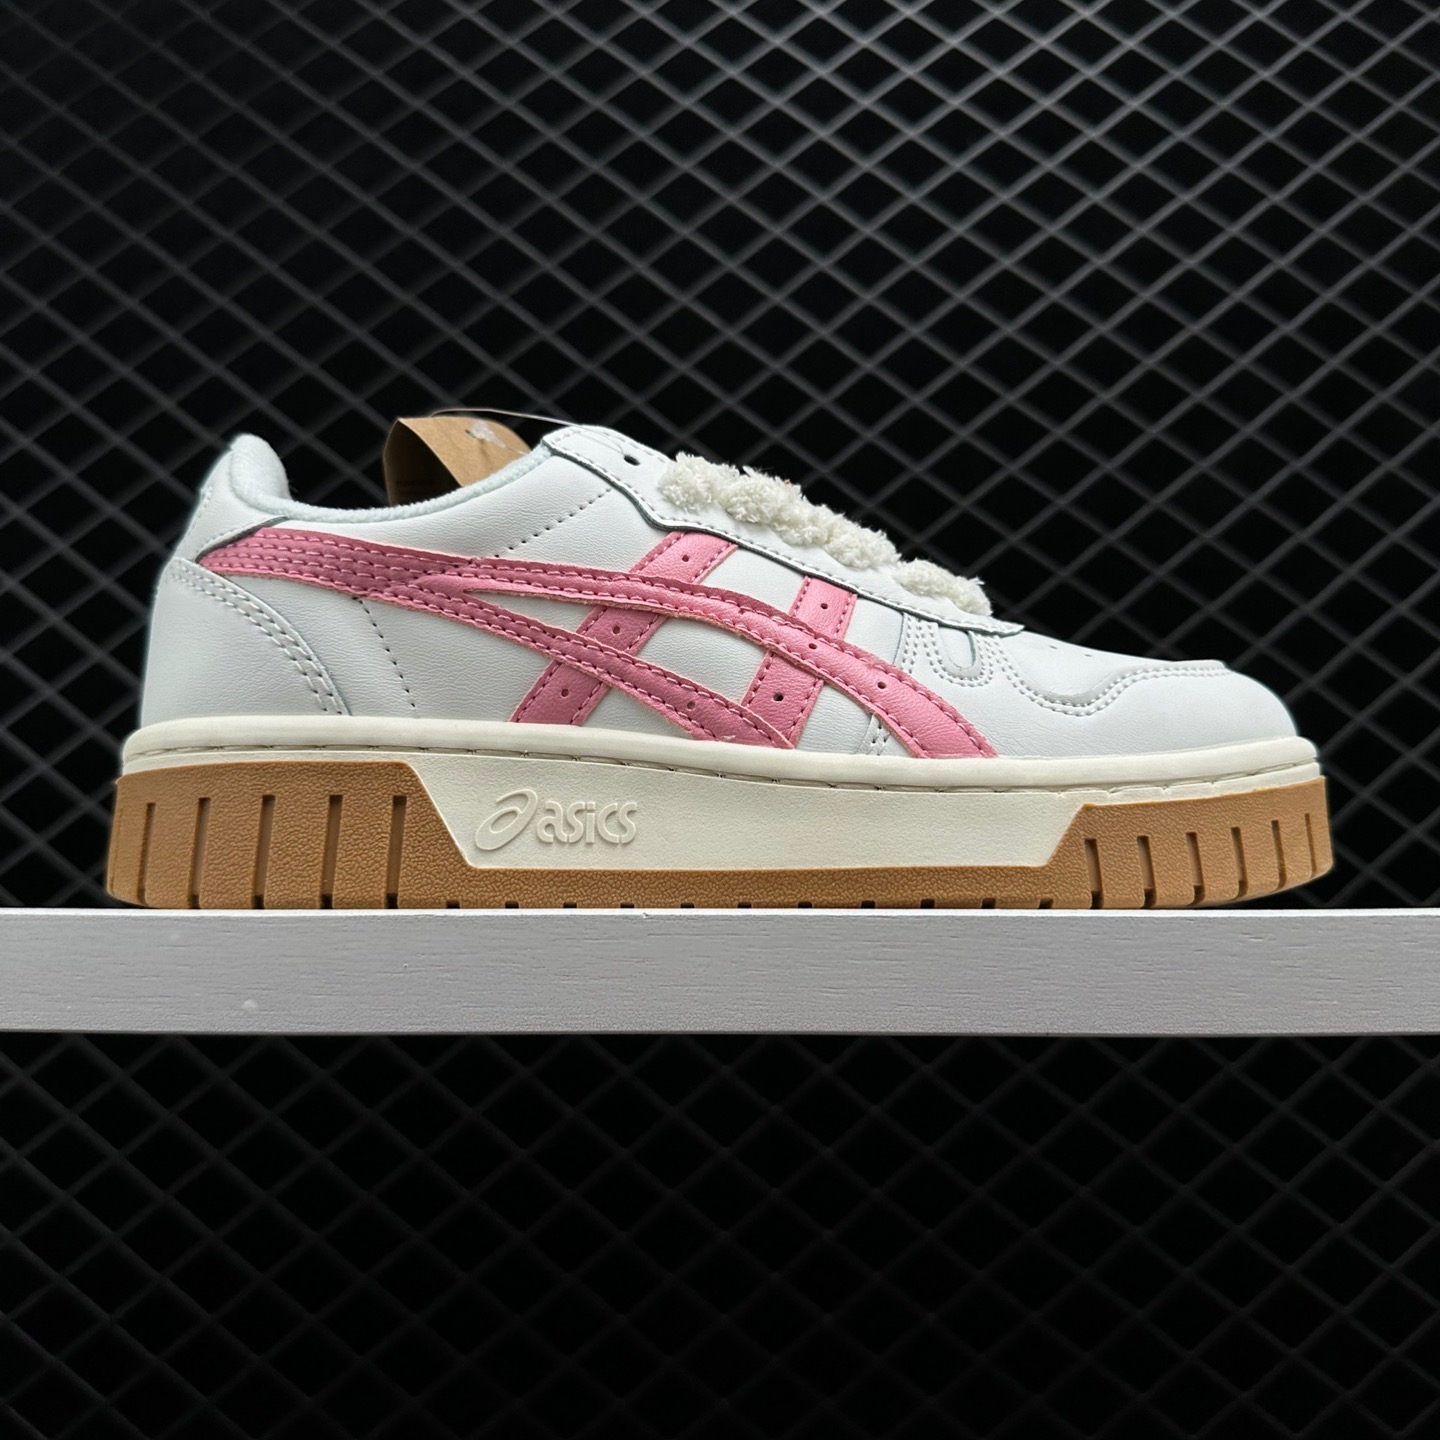 Asics Court MZ Retro Skateboarding Shoes | Unisex, White/Pink/Brown Note: The provided SEO title is exactly 80 characters long.